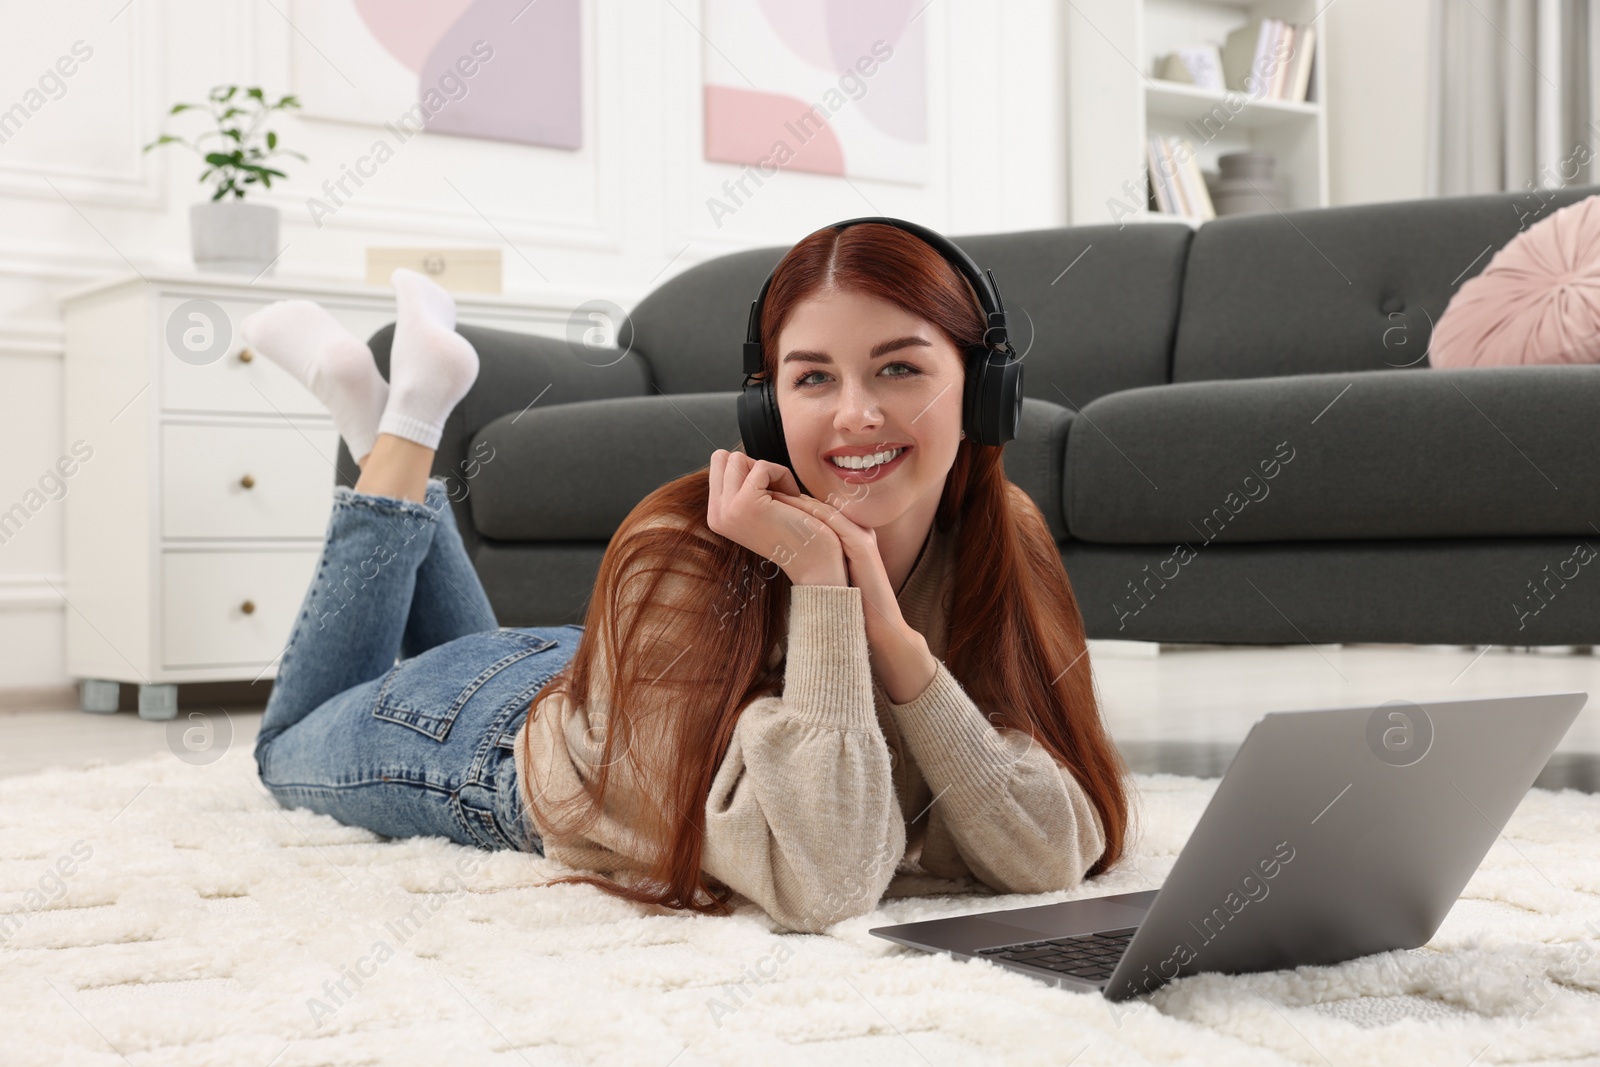 Photo of Happy woman with headphones and laptop on rug in living room